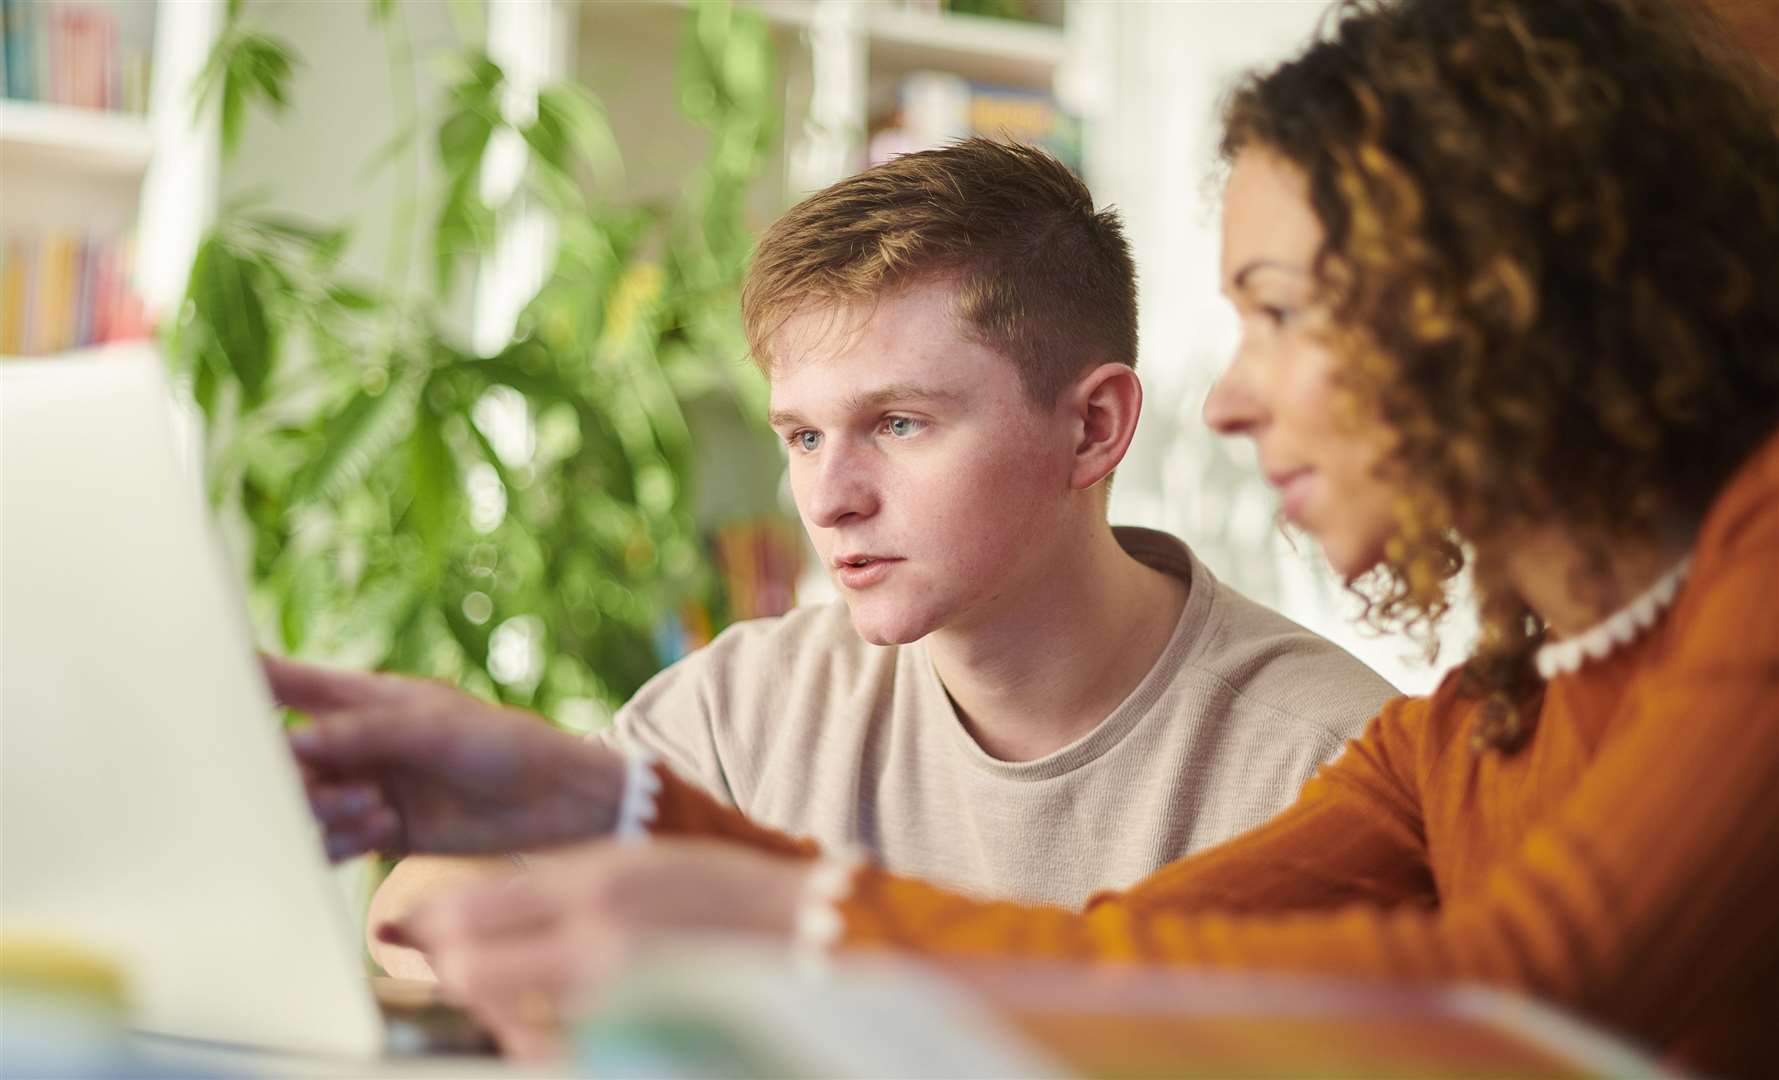 Teens and young adults born in 2002 would now be able to access their money. Image: Stock photo.